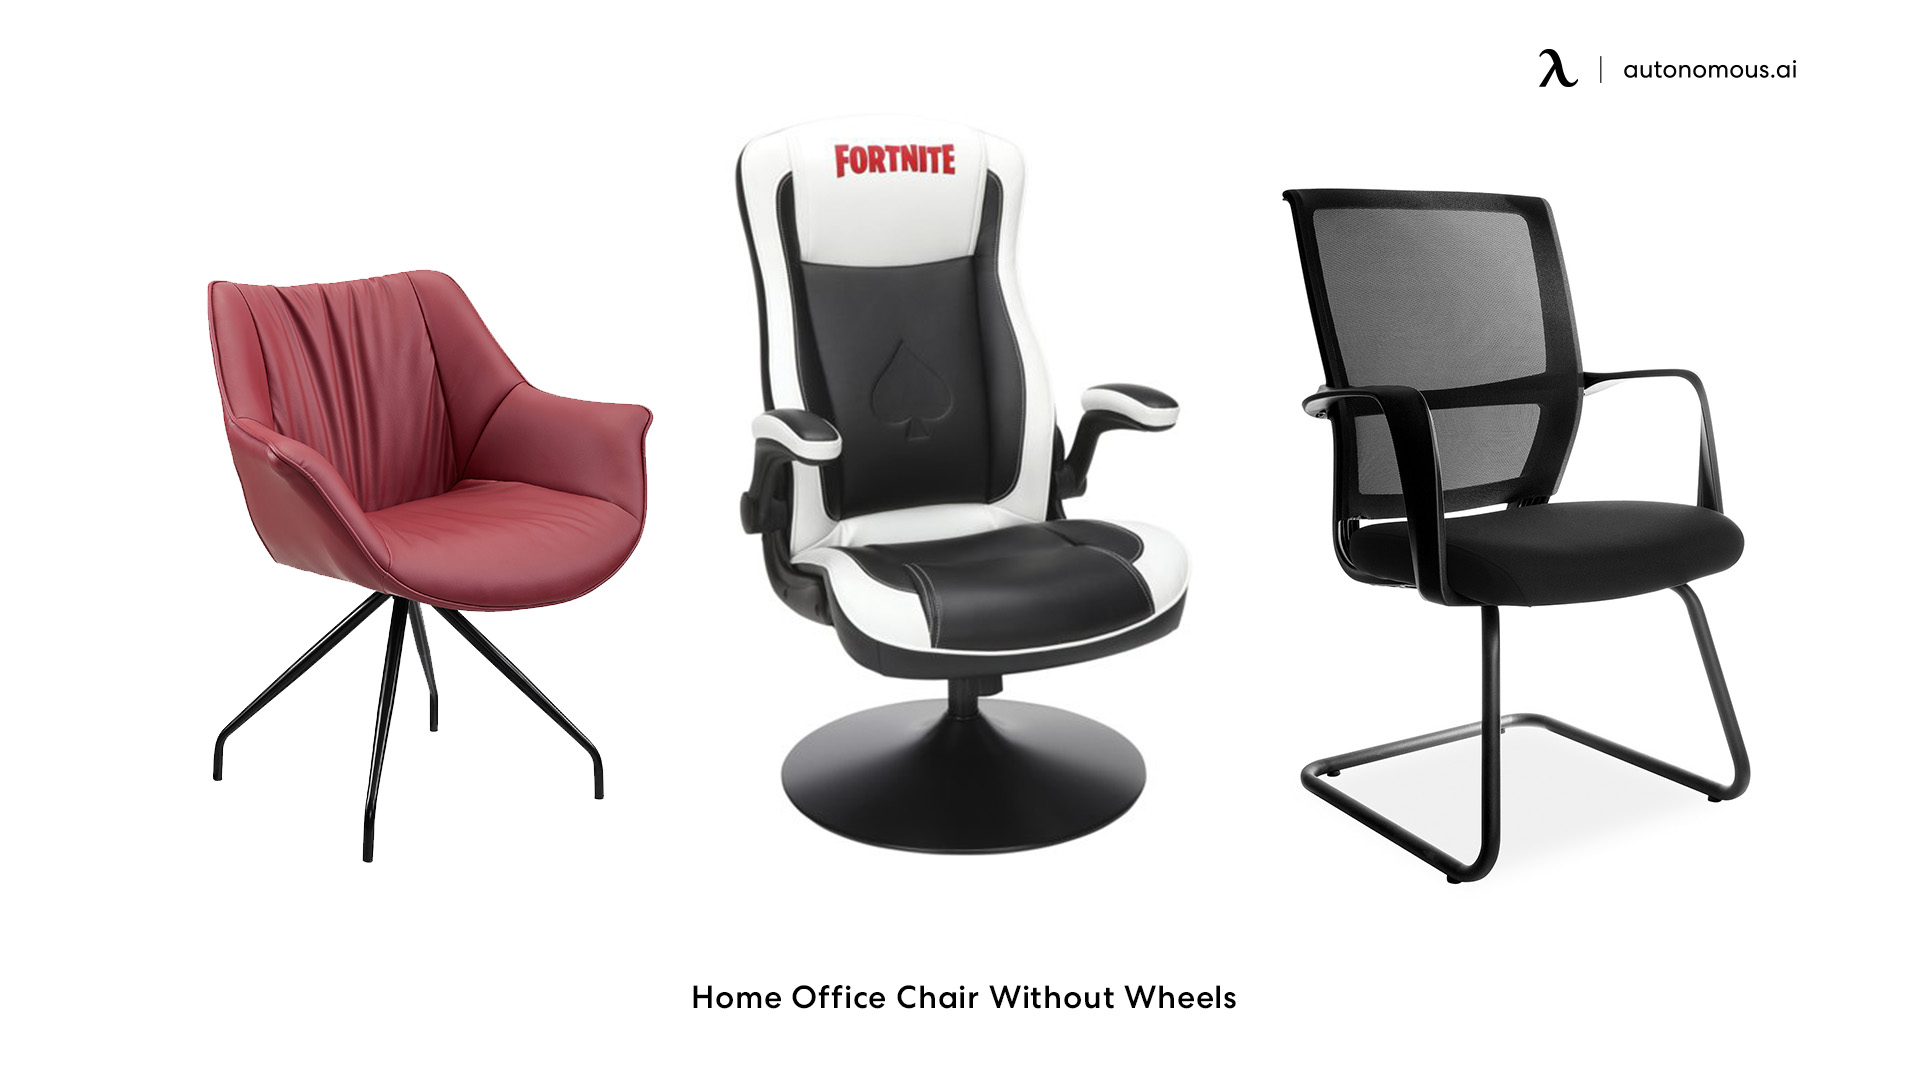 Home Office Chair With Wheels vs. Without Wheels